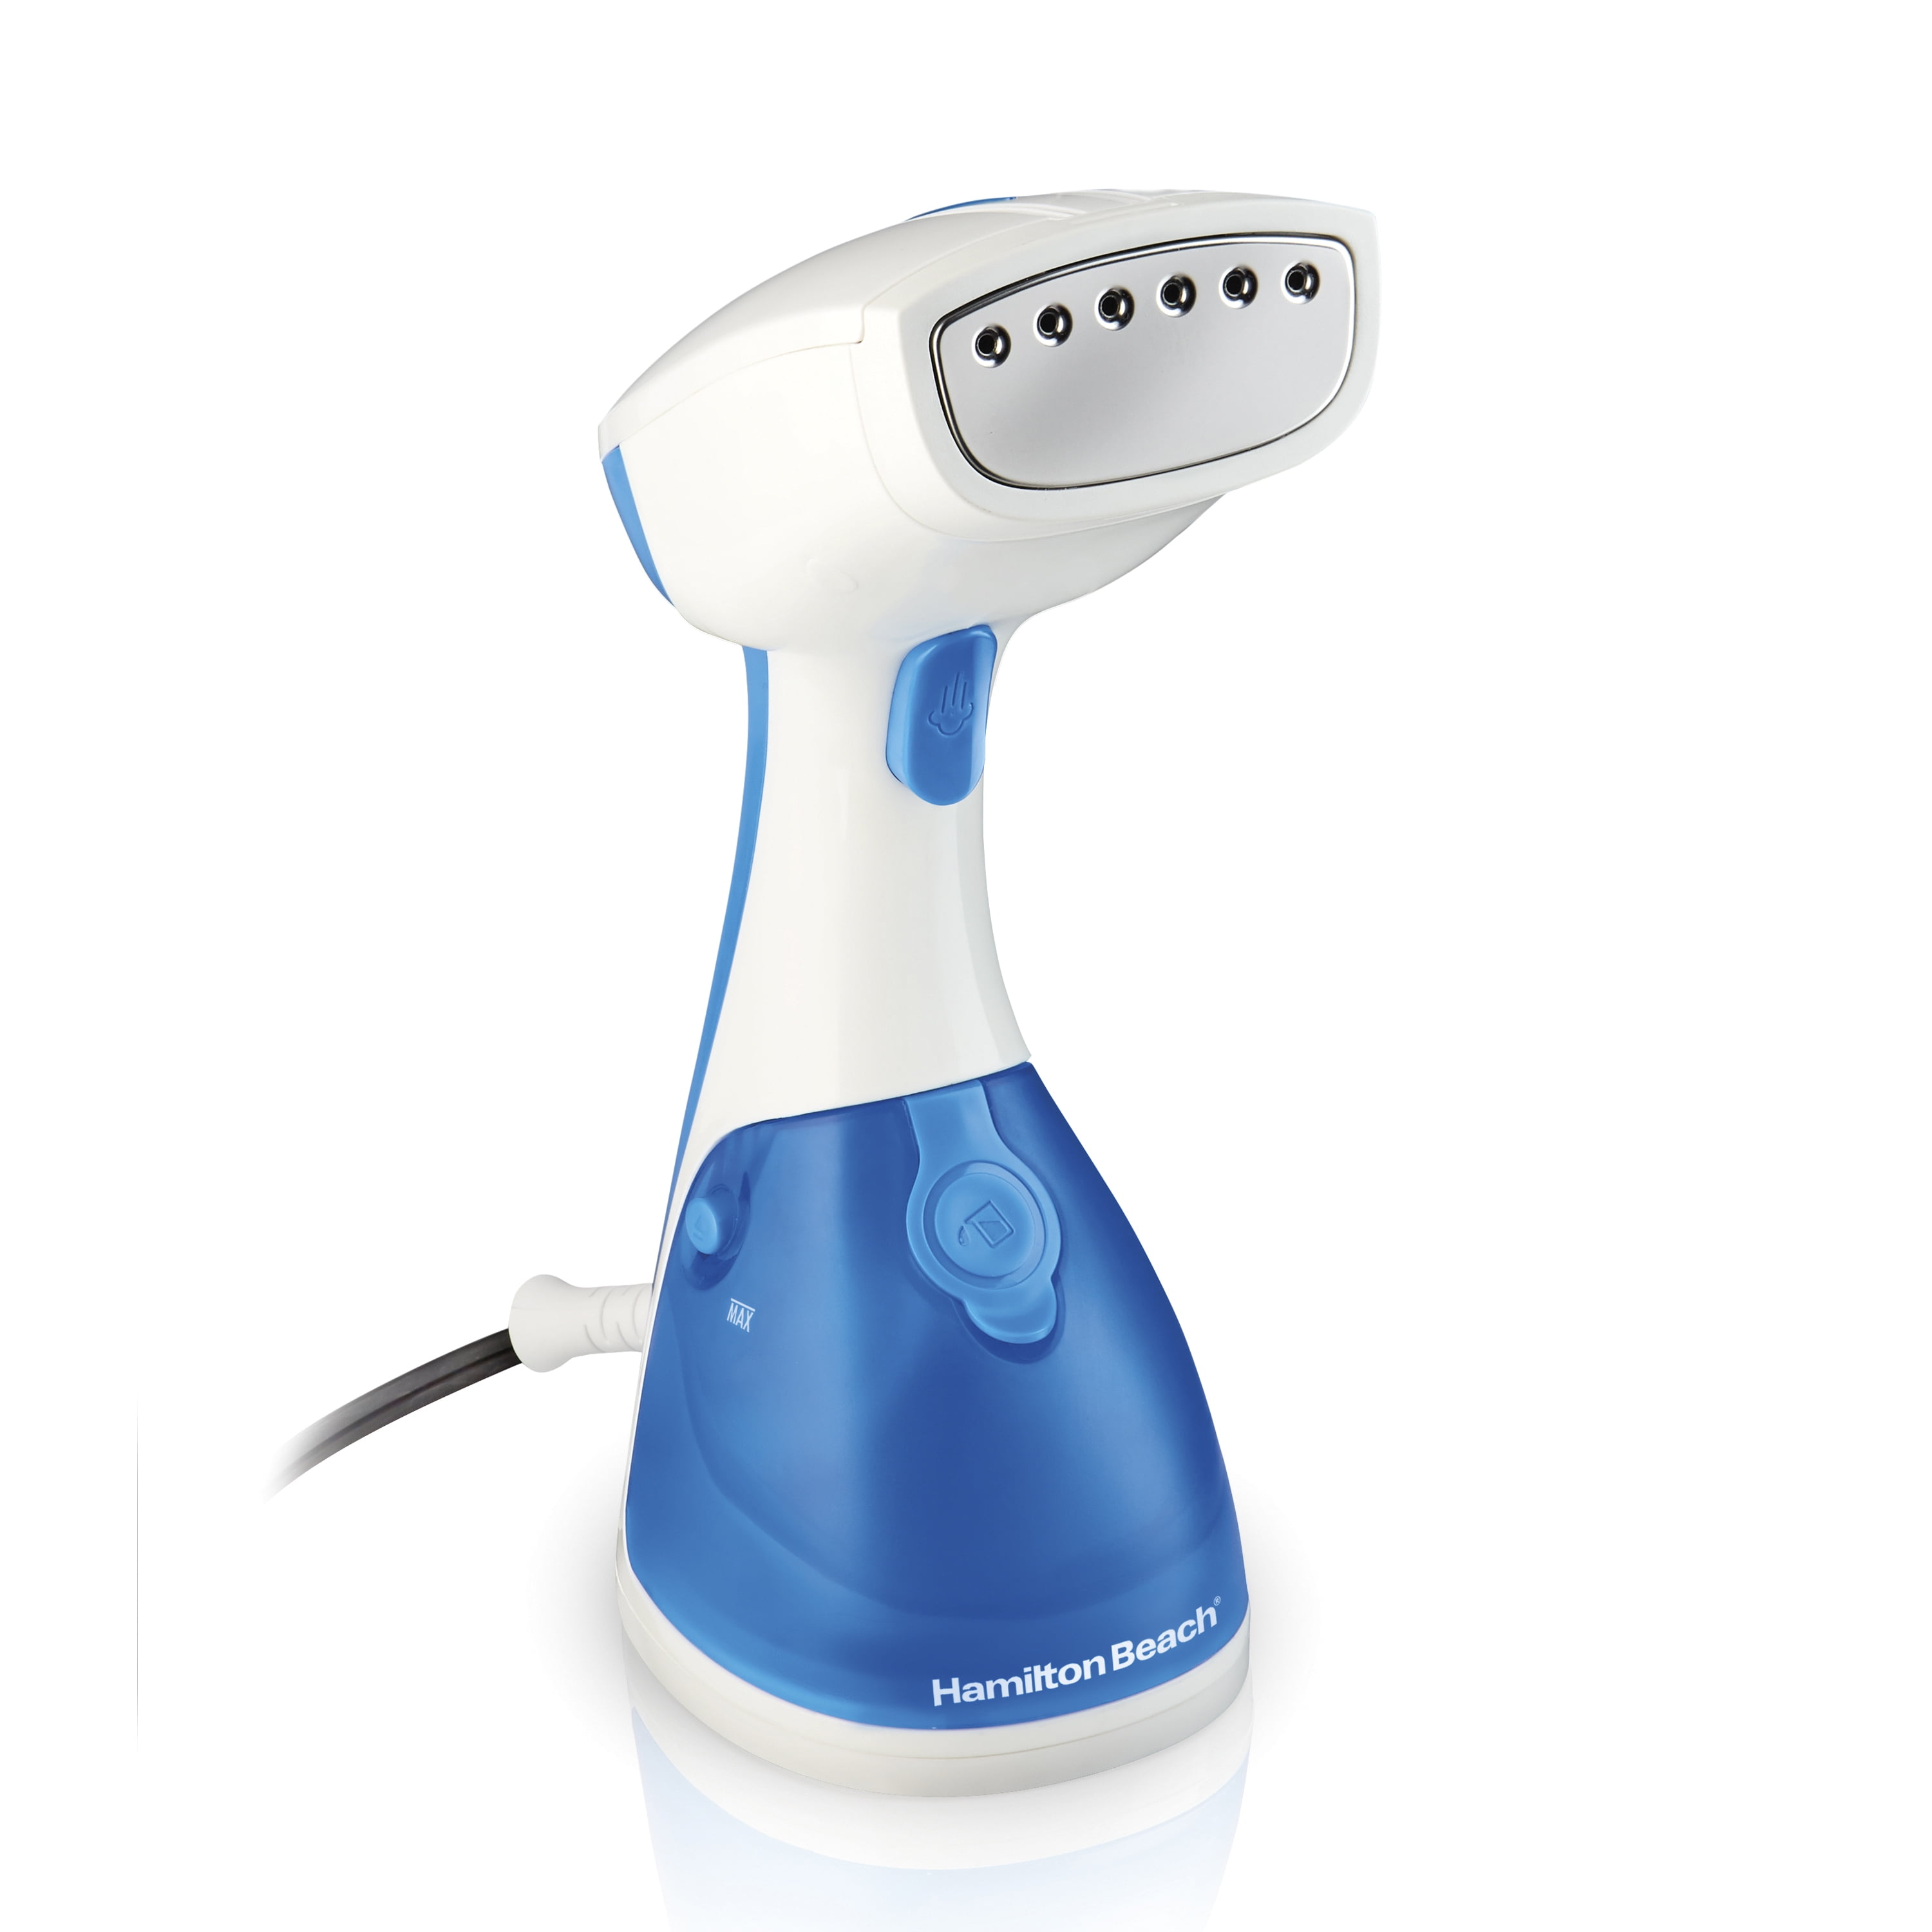 Electrolux Handheld Portable Garment Steamer With Extra Long Cord